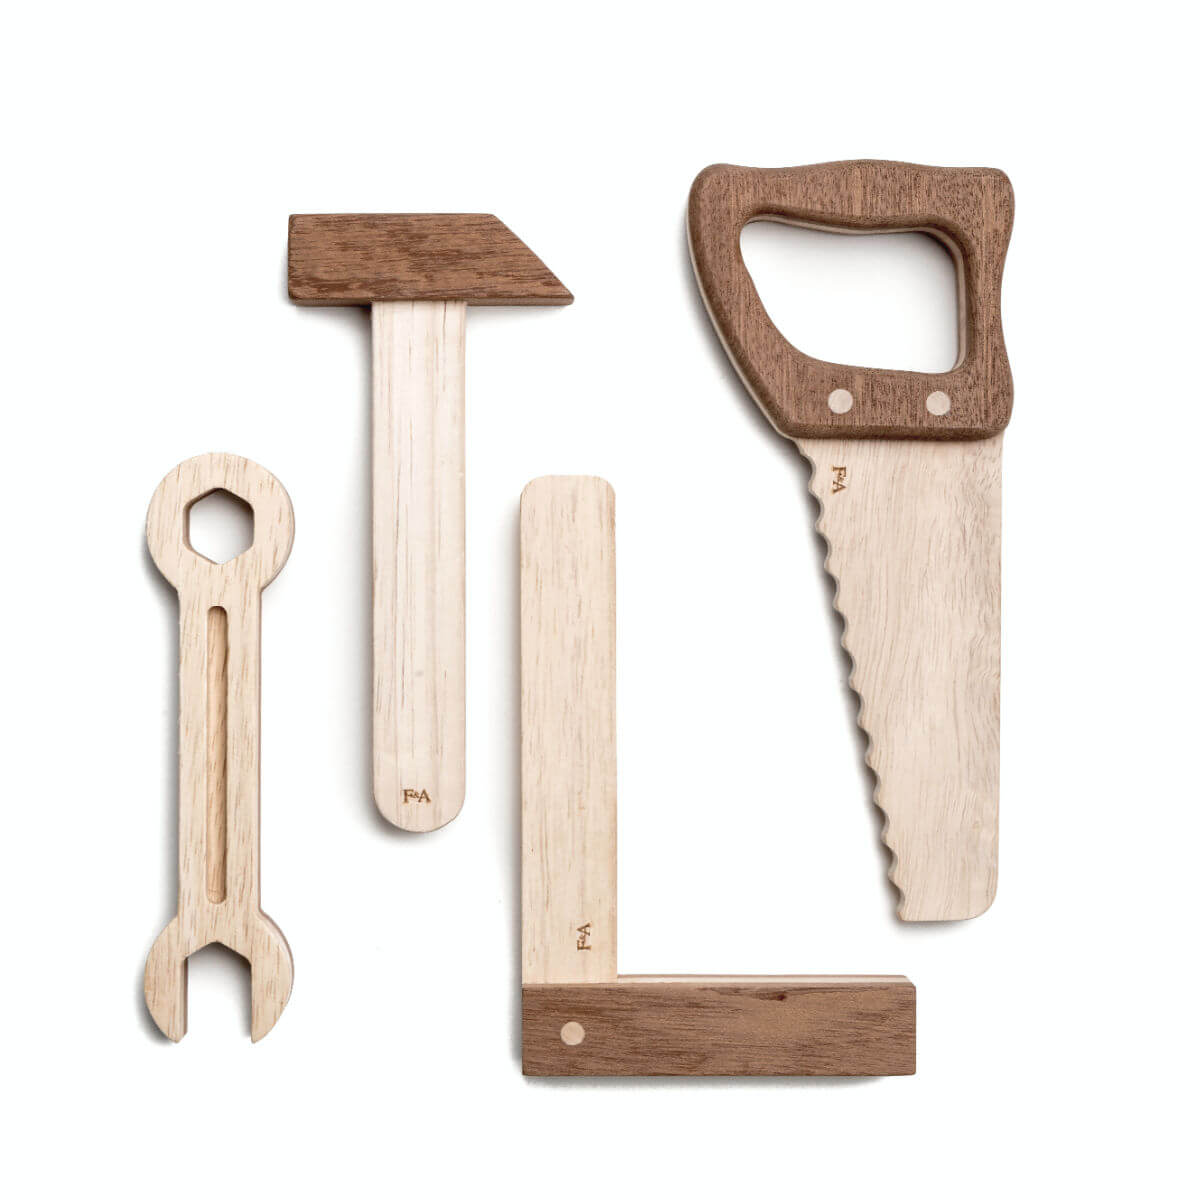 Fanny and Alexander pretend play wooden tool set toy